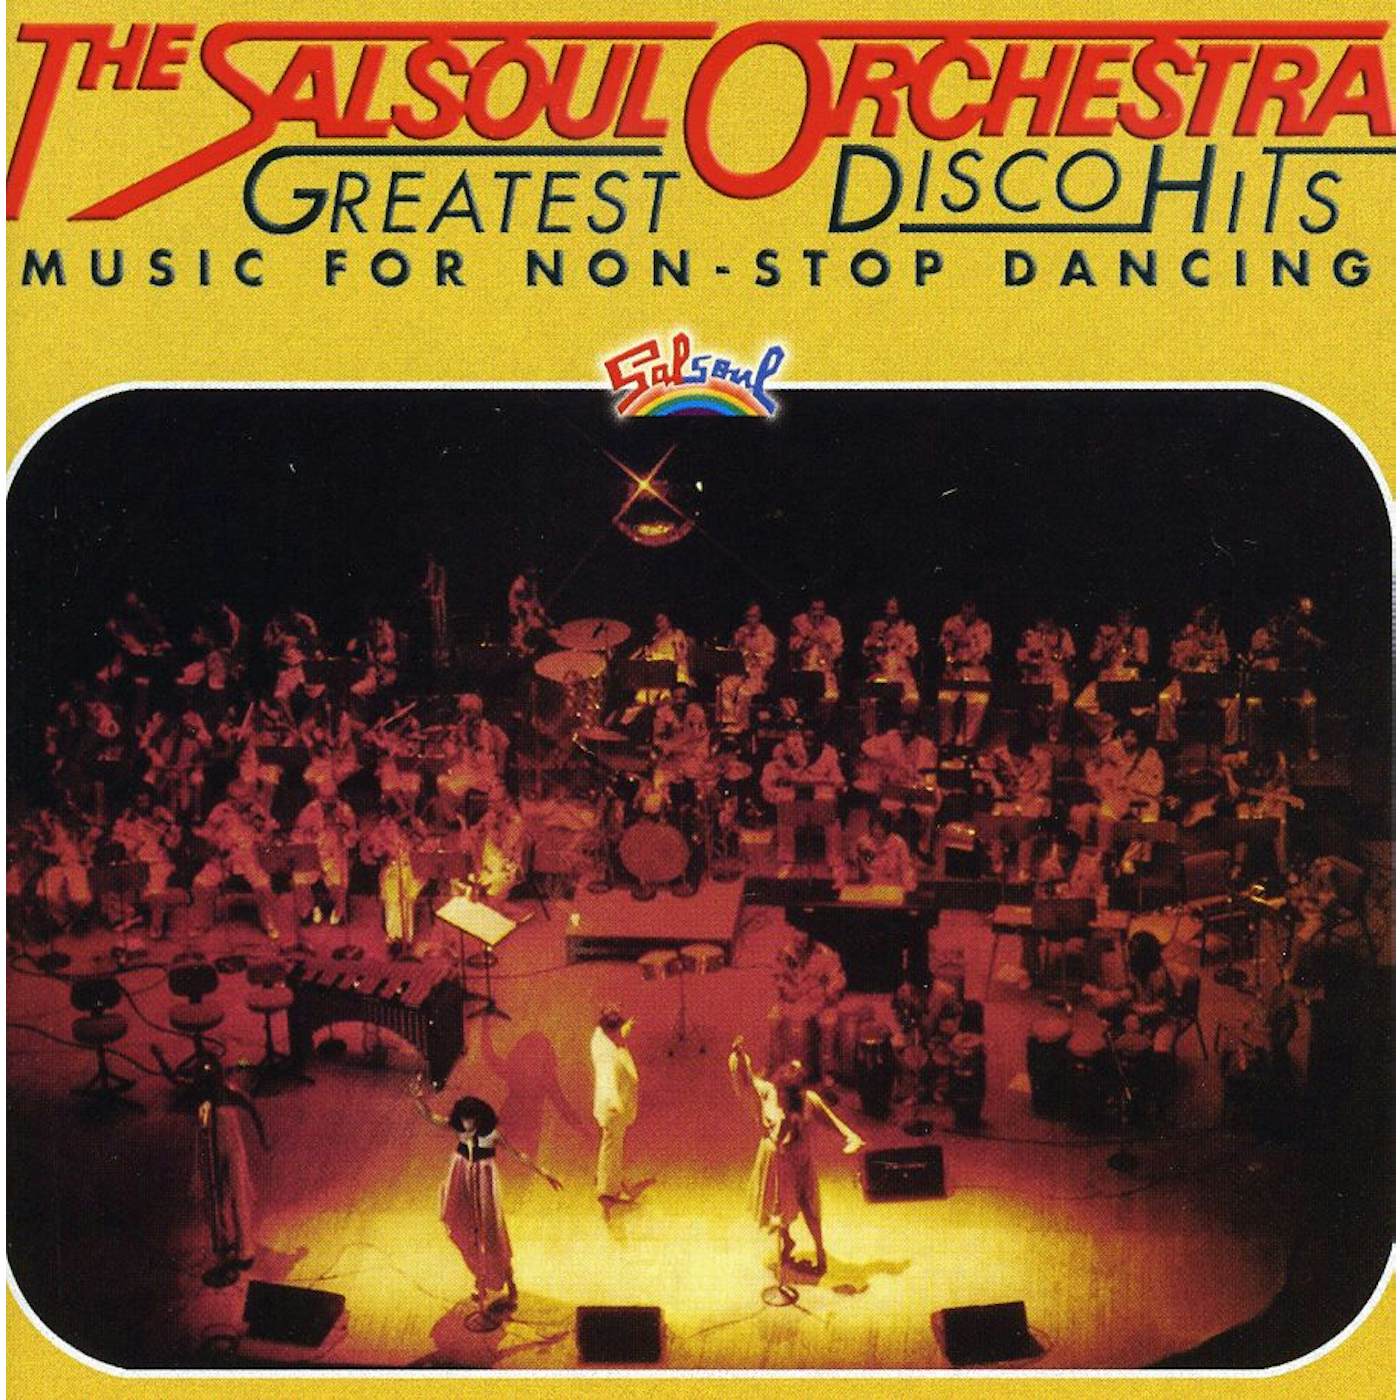 The Salsoul Orchestra GREATEST DISCO HITS CD